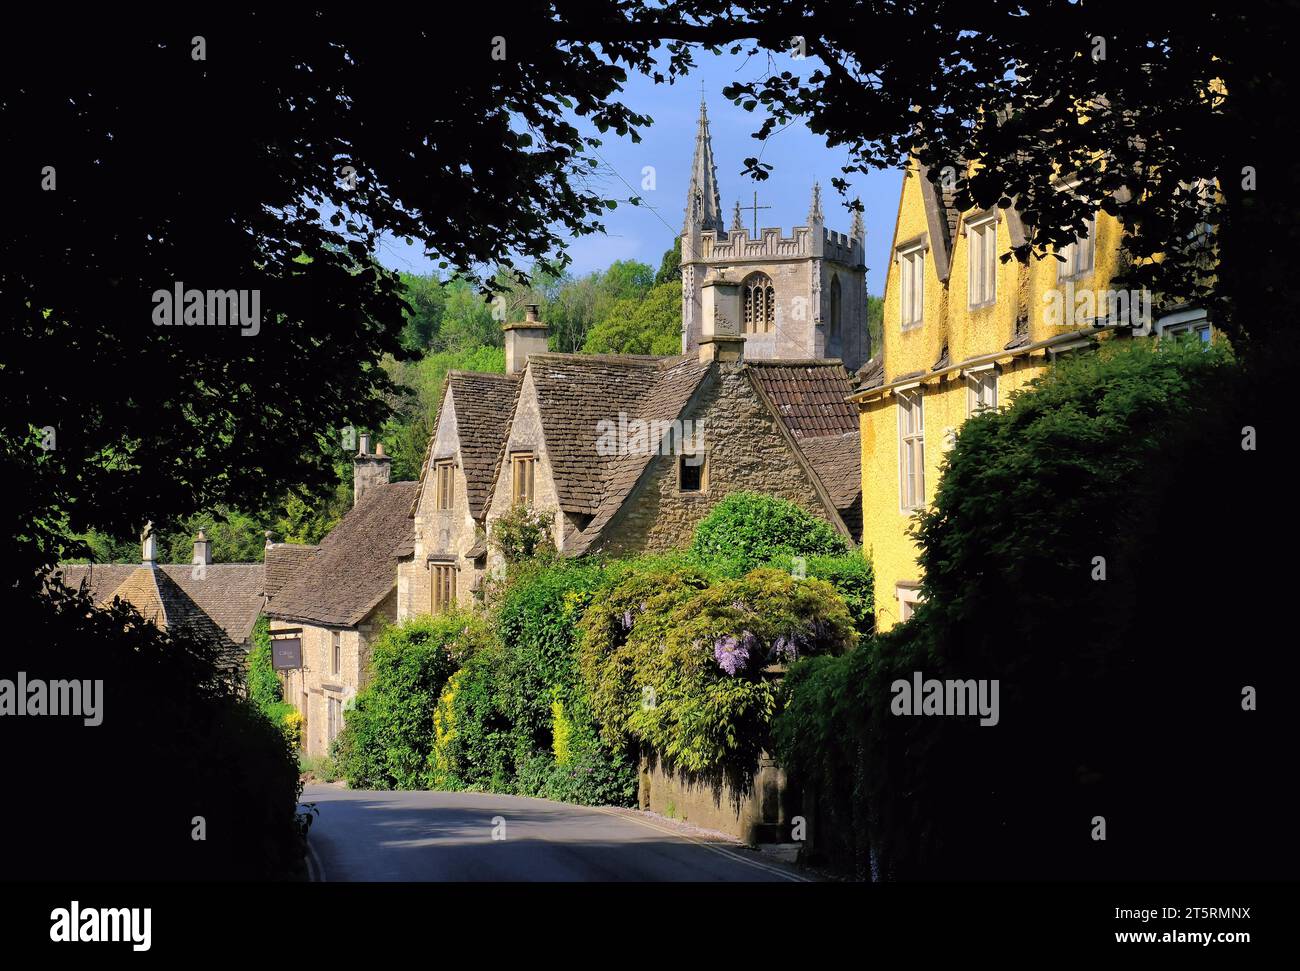 Castle Combe: St Andrew’s Church, Cotswold stone cottages and wisteria in bloom in Castle Combe village, Cotswolds, Wiltshire, England, UK Stock Photo